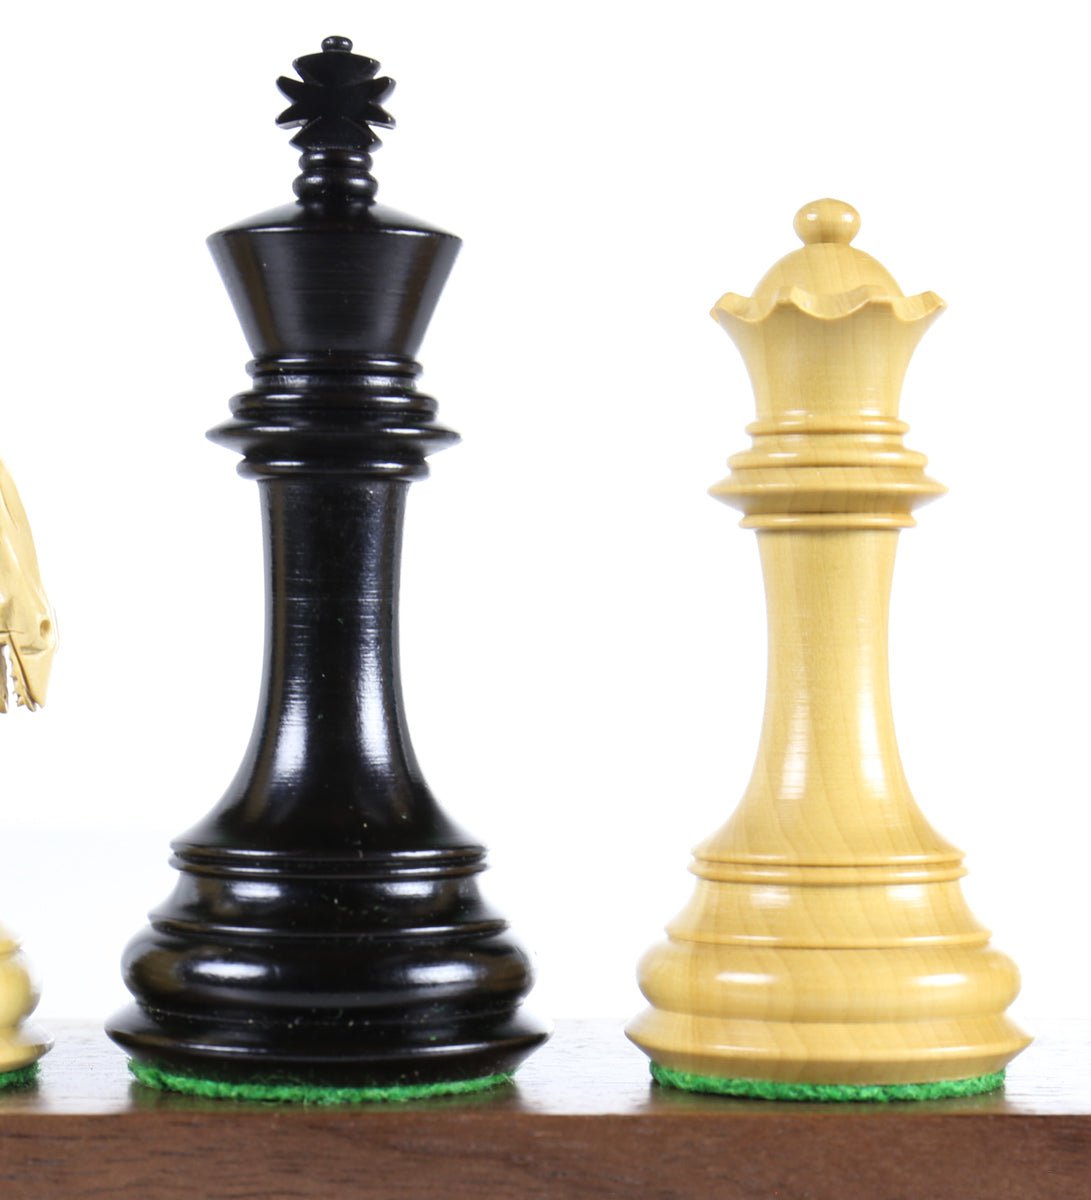 SINGLE REPLACEMENT PIECES: Colombian 3.75" Ebonized Chess Pieces - Parts - Chess-House